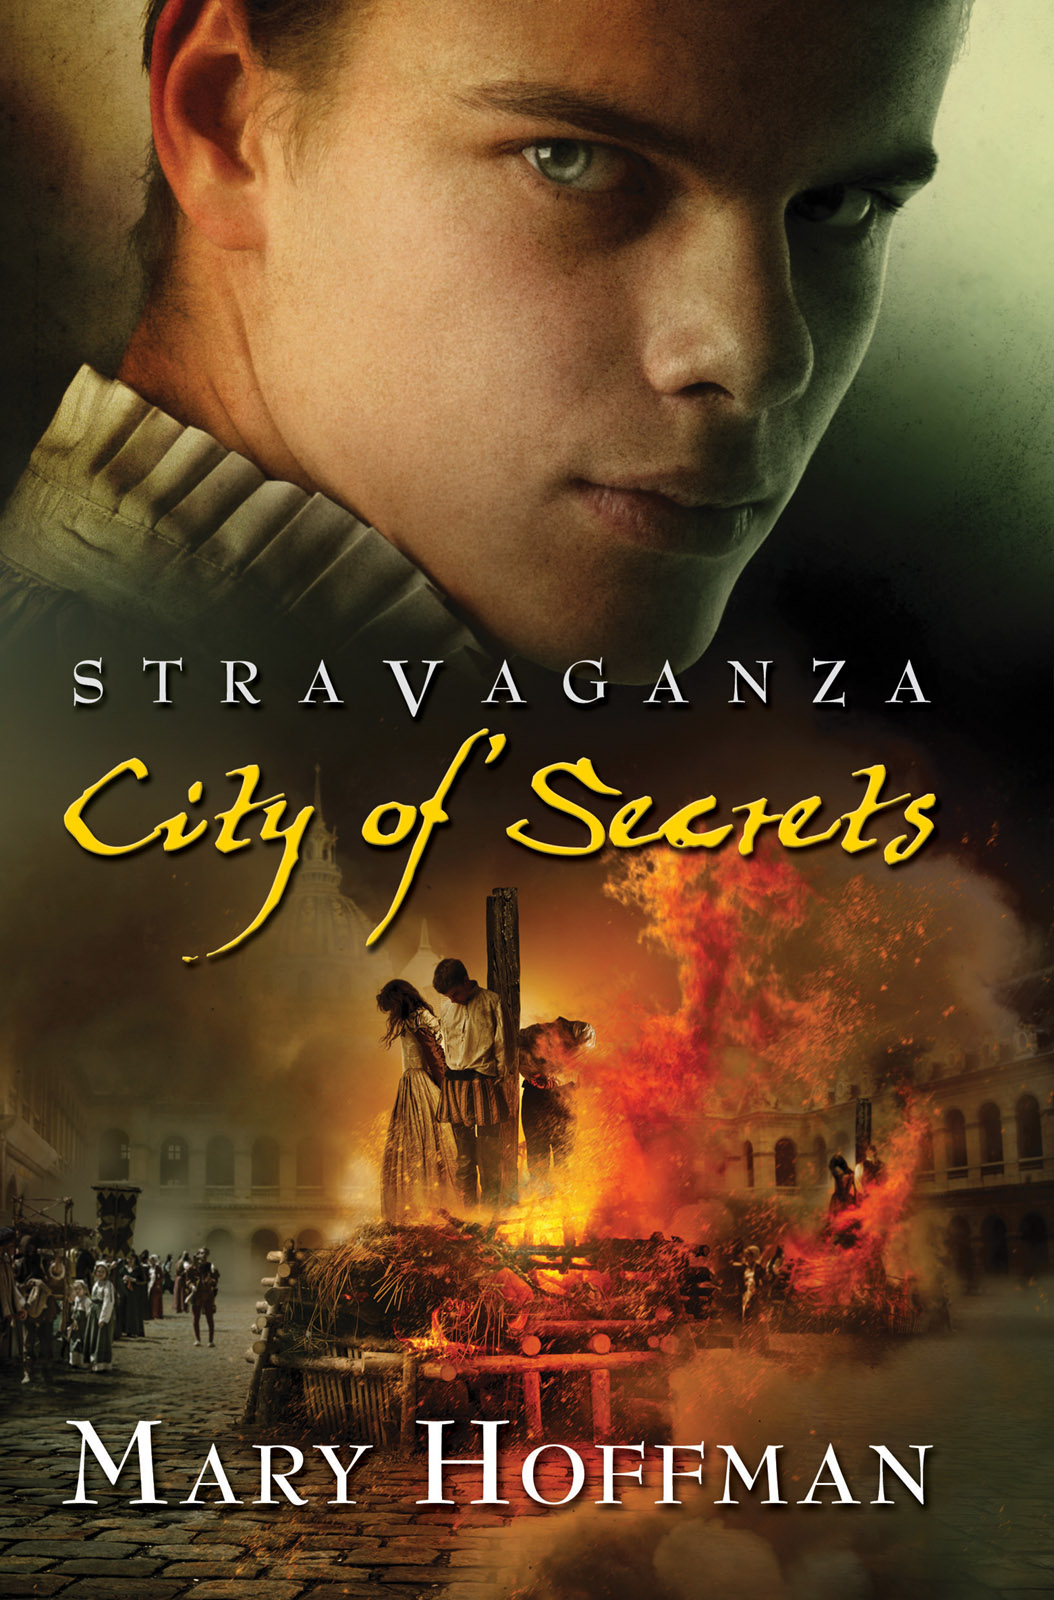 City of Secrets (2008) by Mary Hoffman